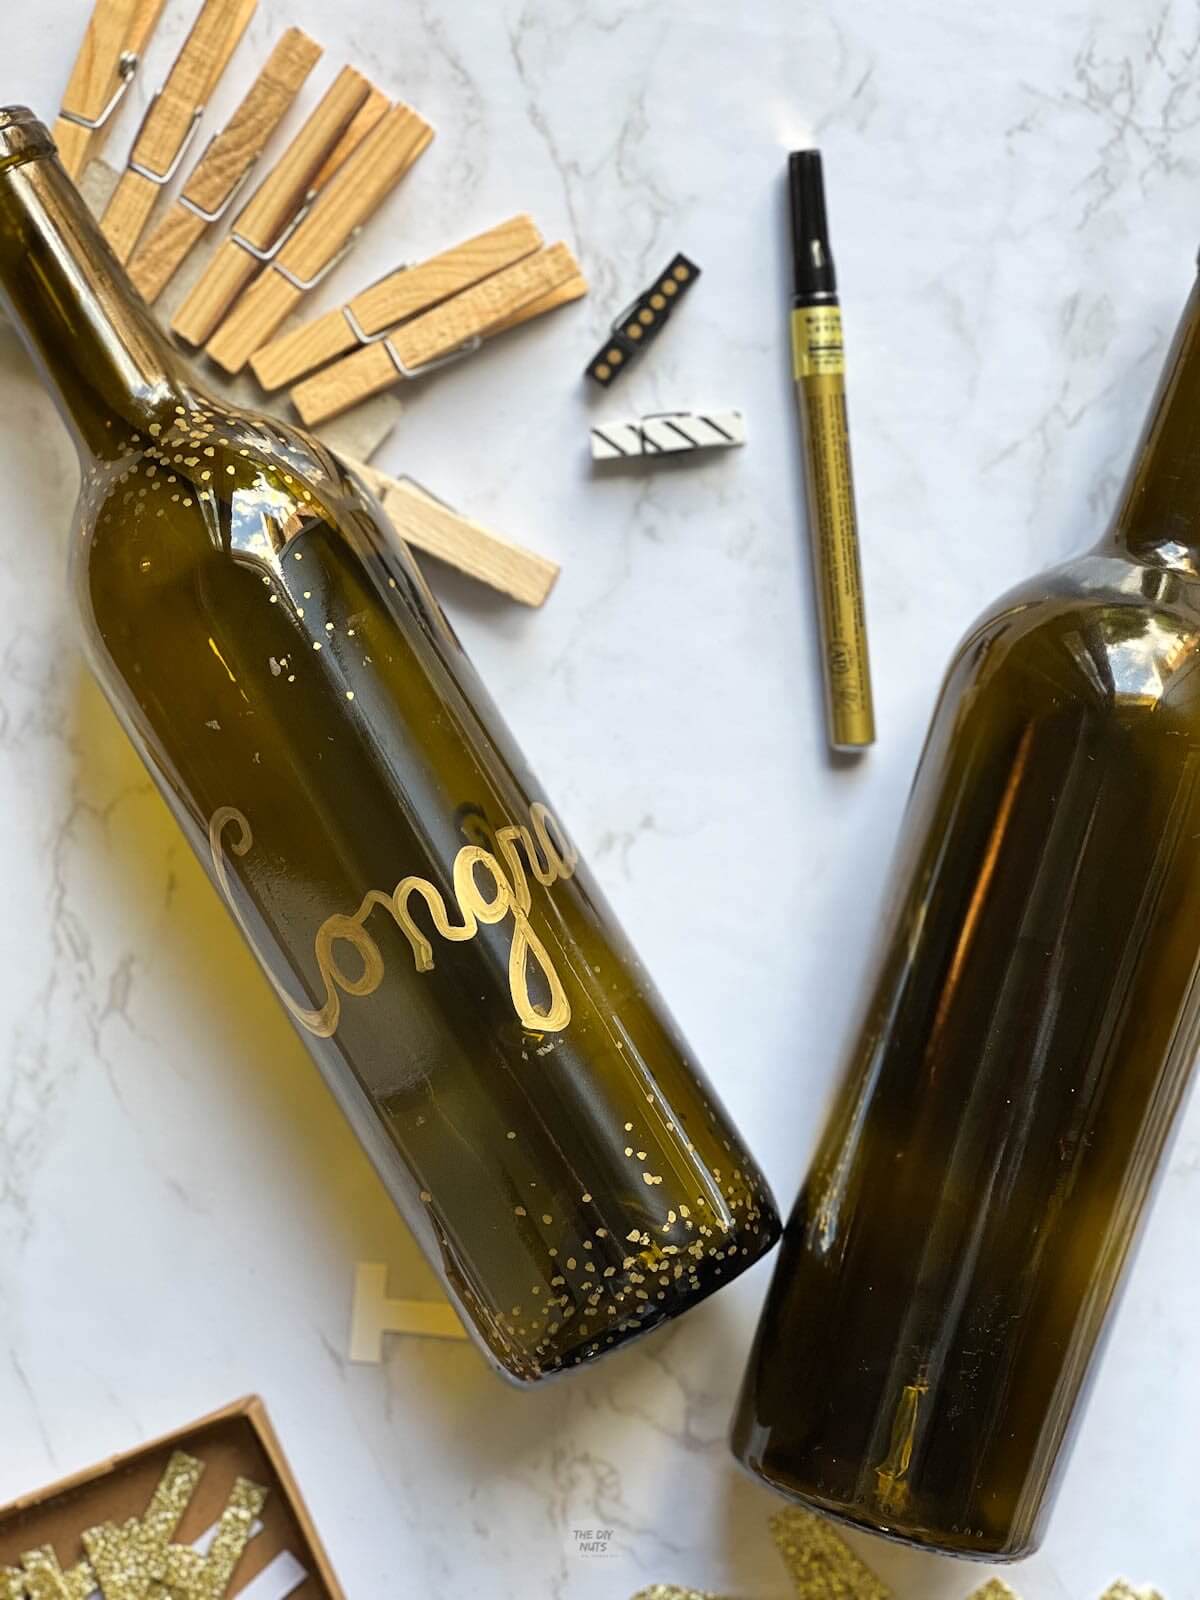 wine bottle with congrats on it with clothes pins and gold marker.